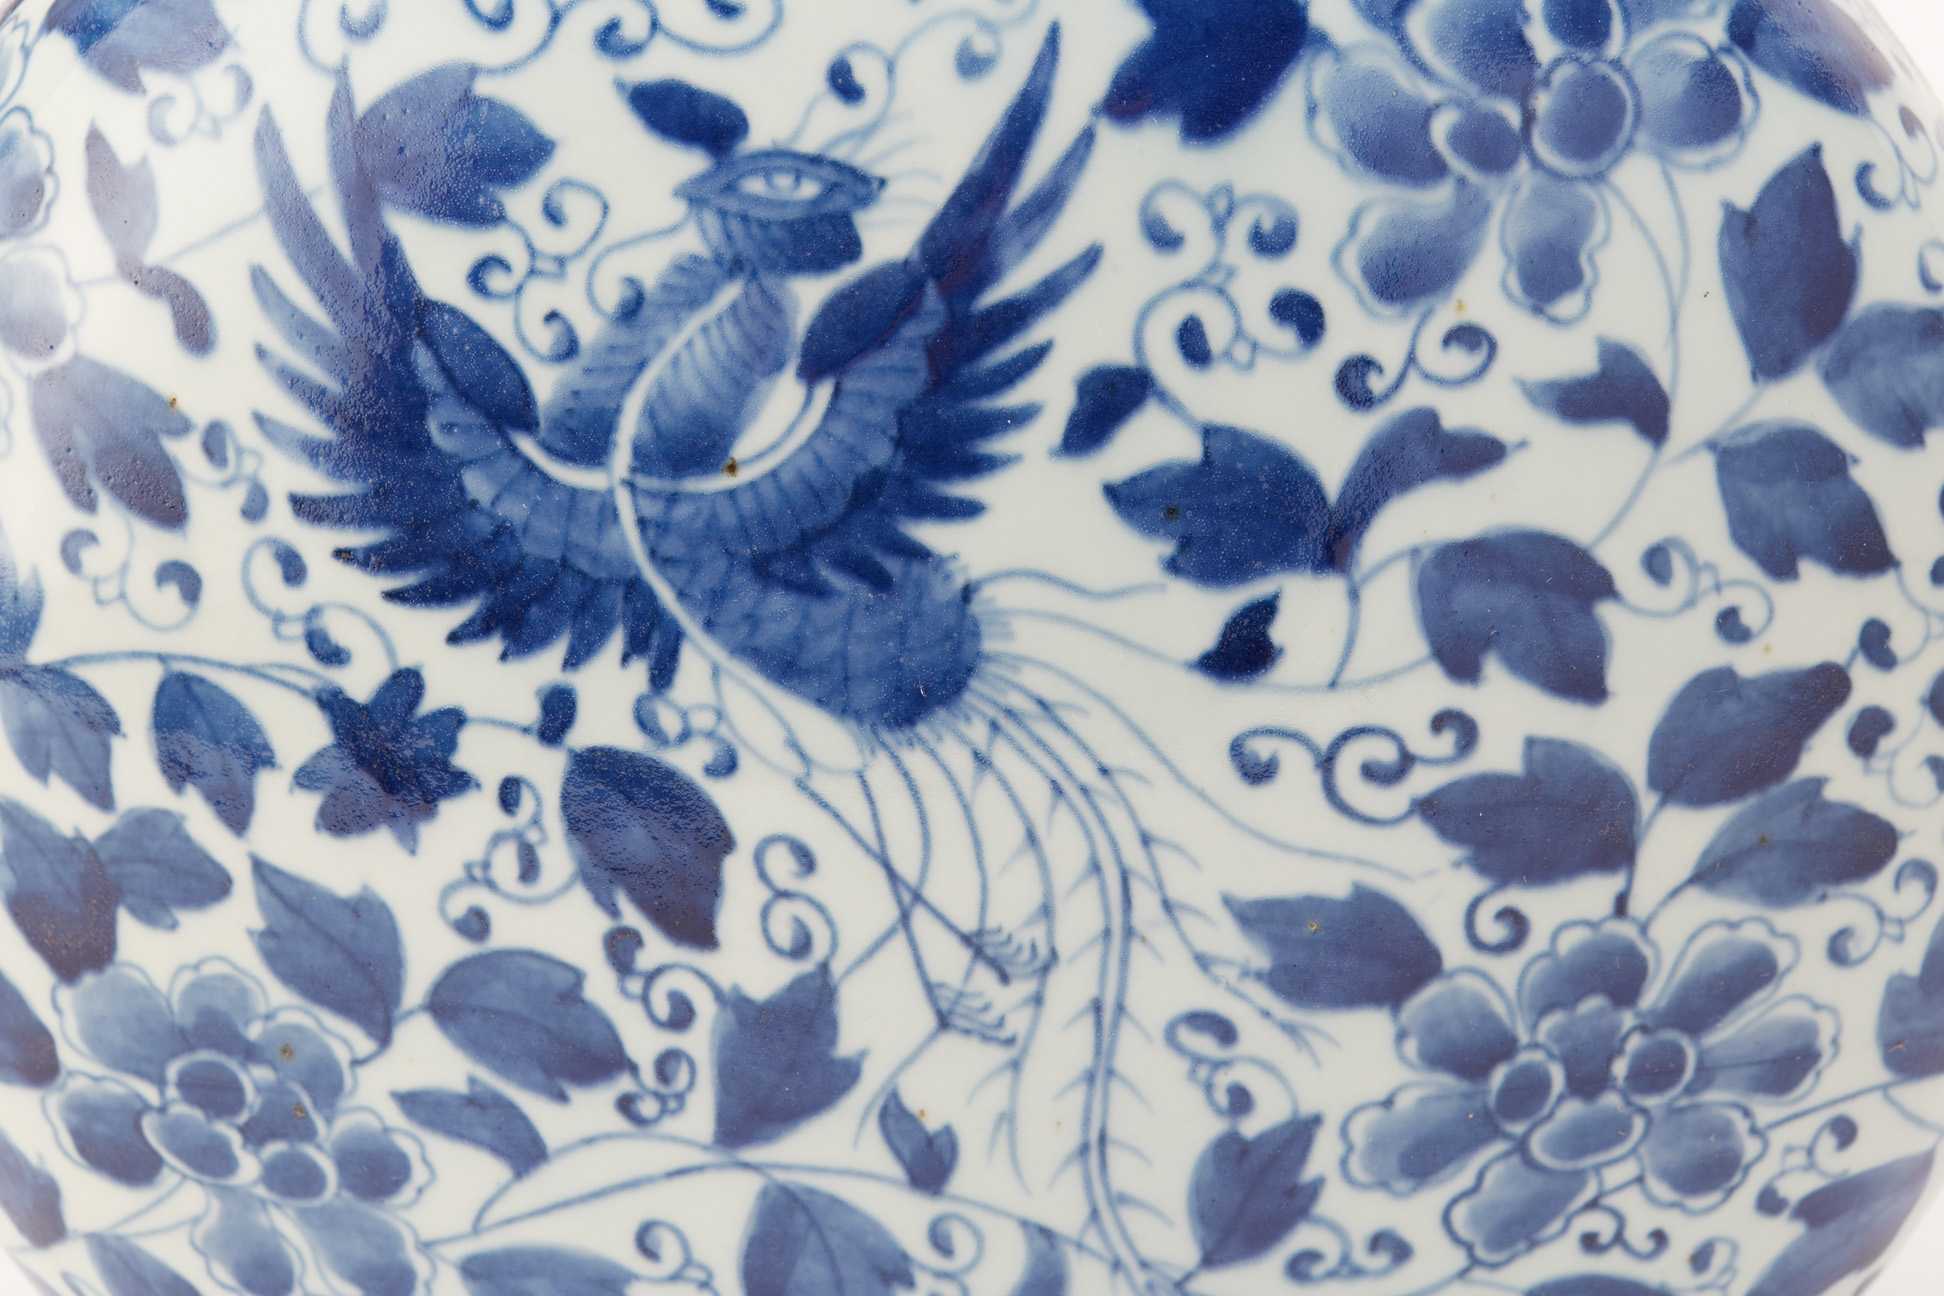 A MING STYLE BLUE AND WHITE PORCELAIN MOON FLASK - Image 3 of 4